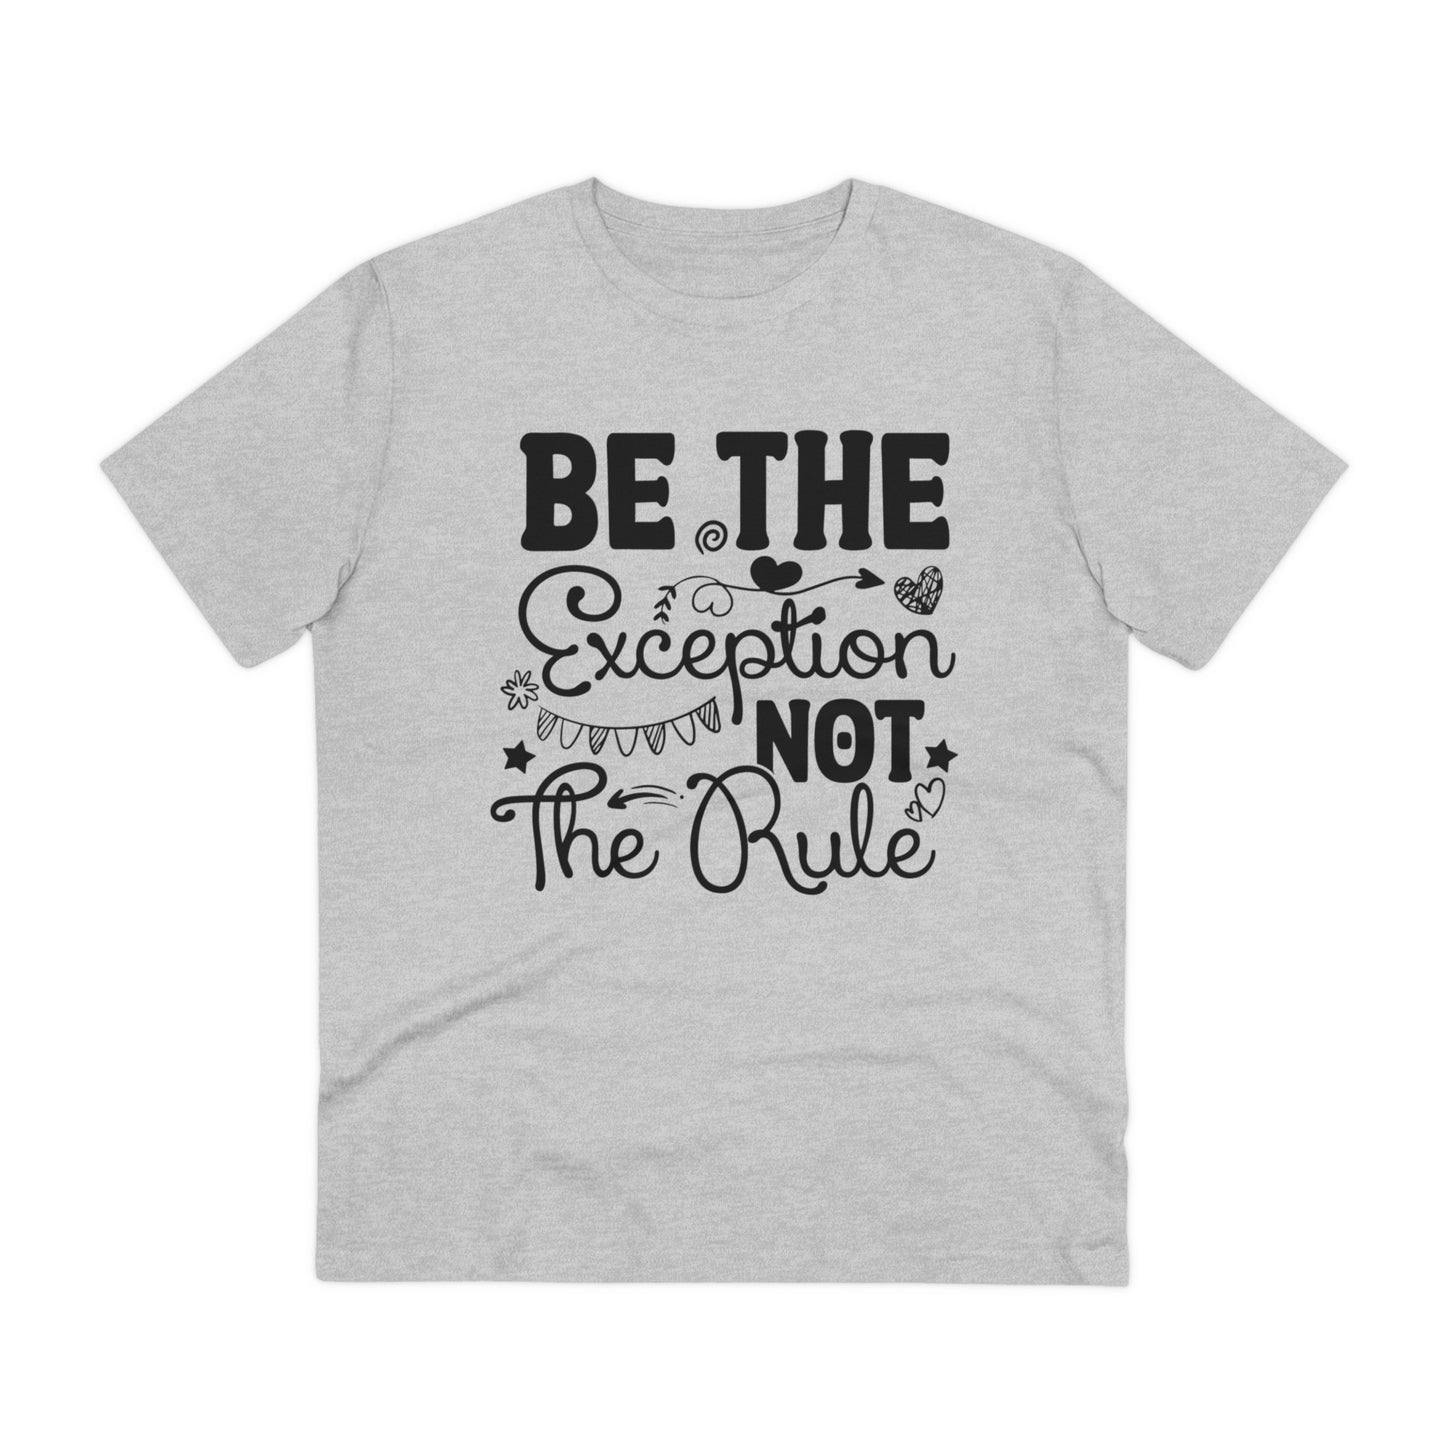 Be the exception, not the rule - Organic Unisex T-shirt